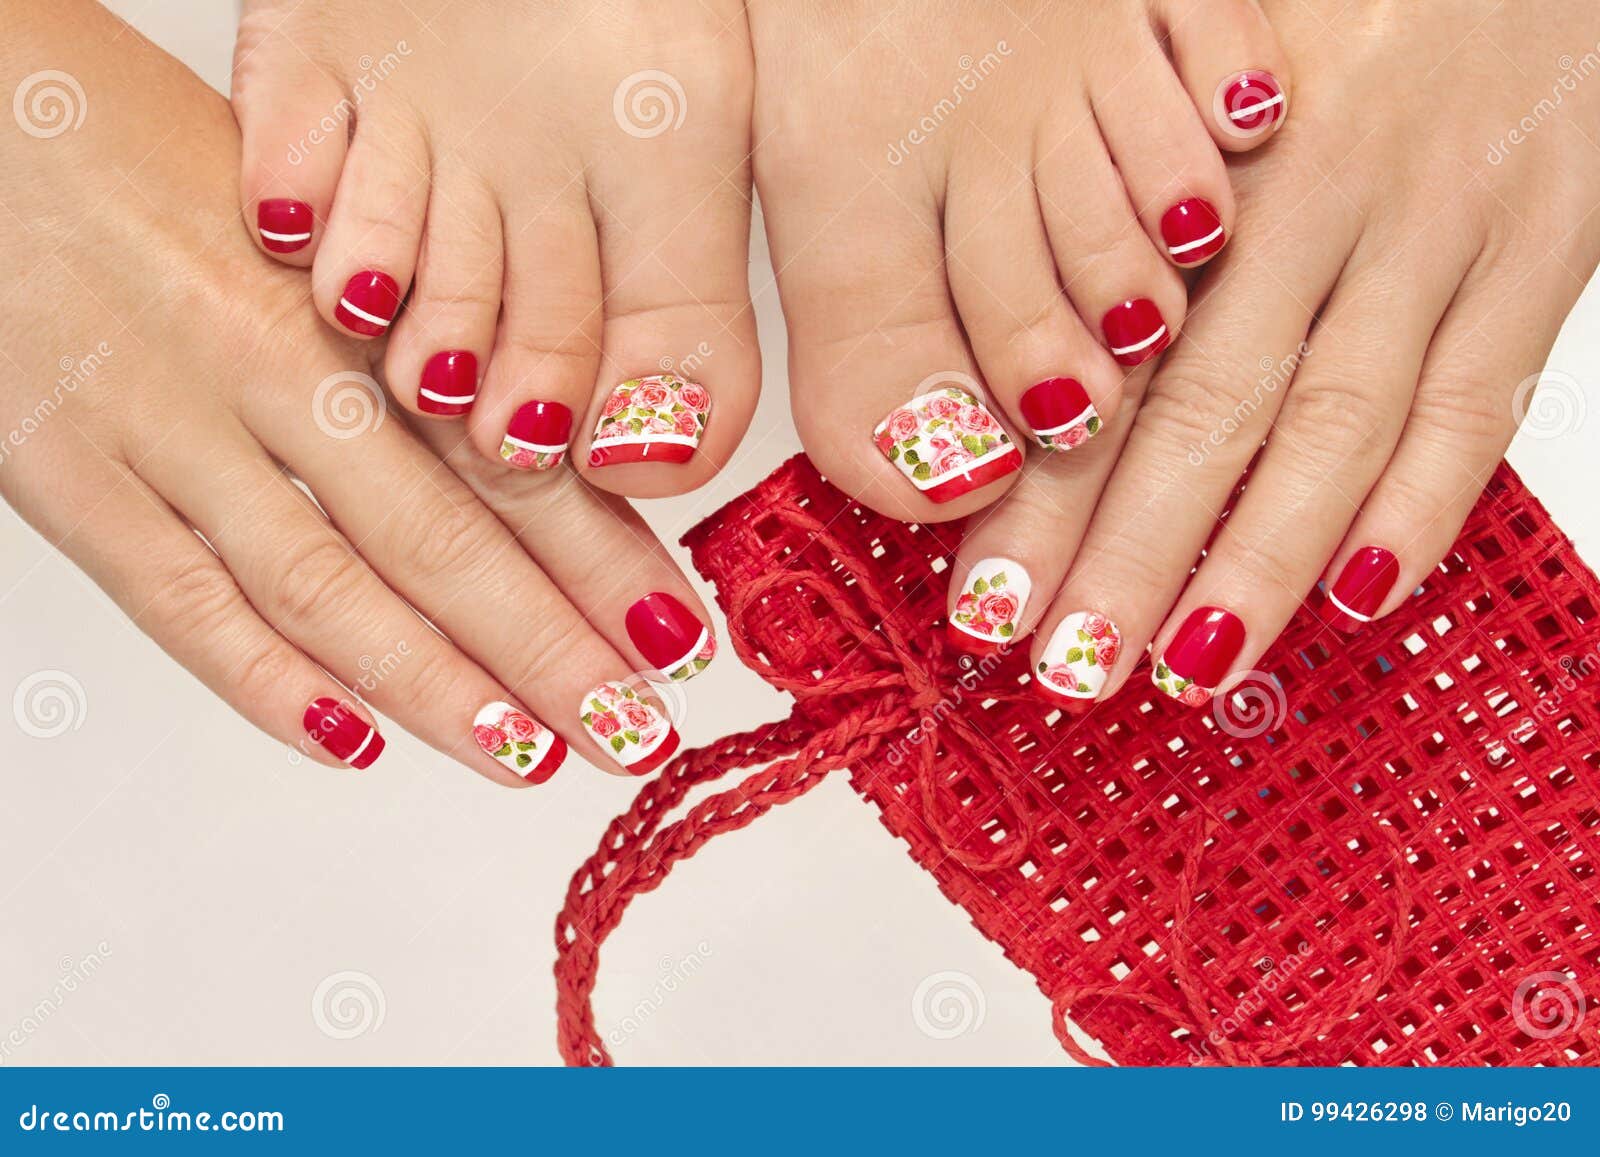 red french manicure.